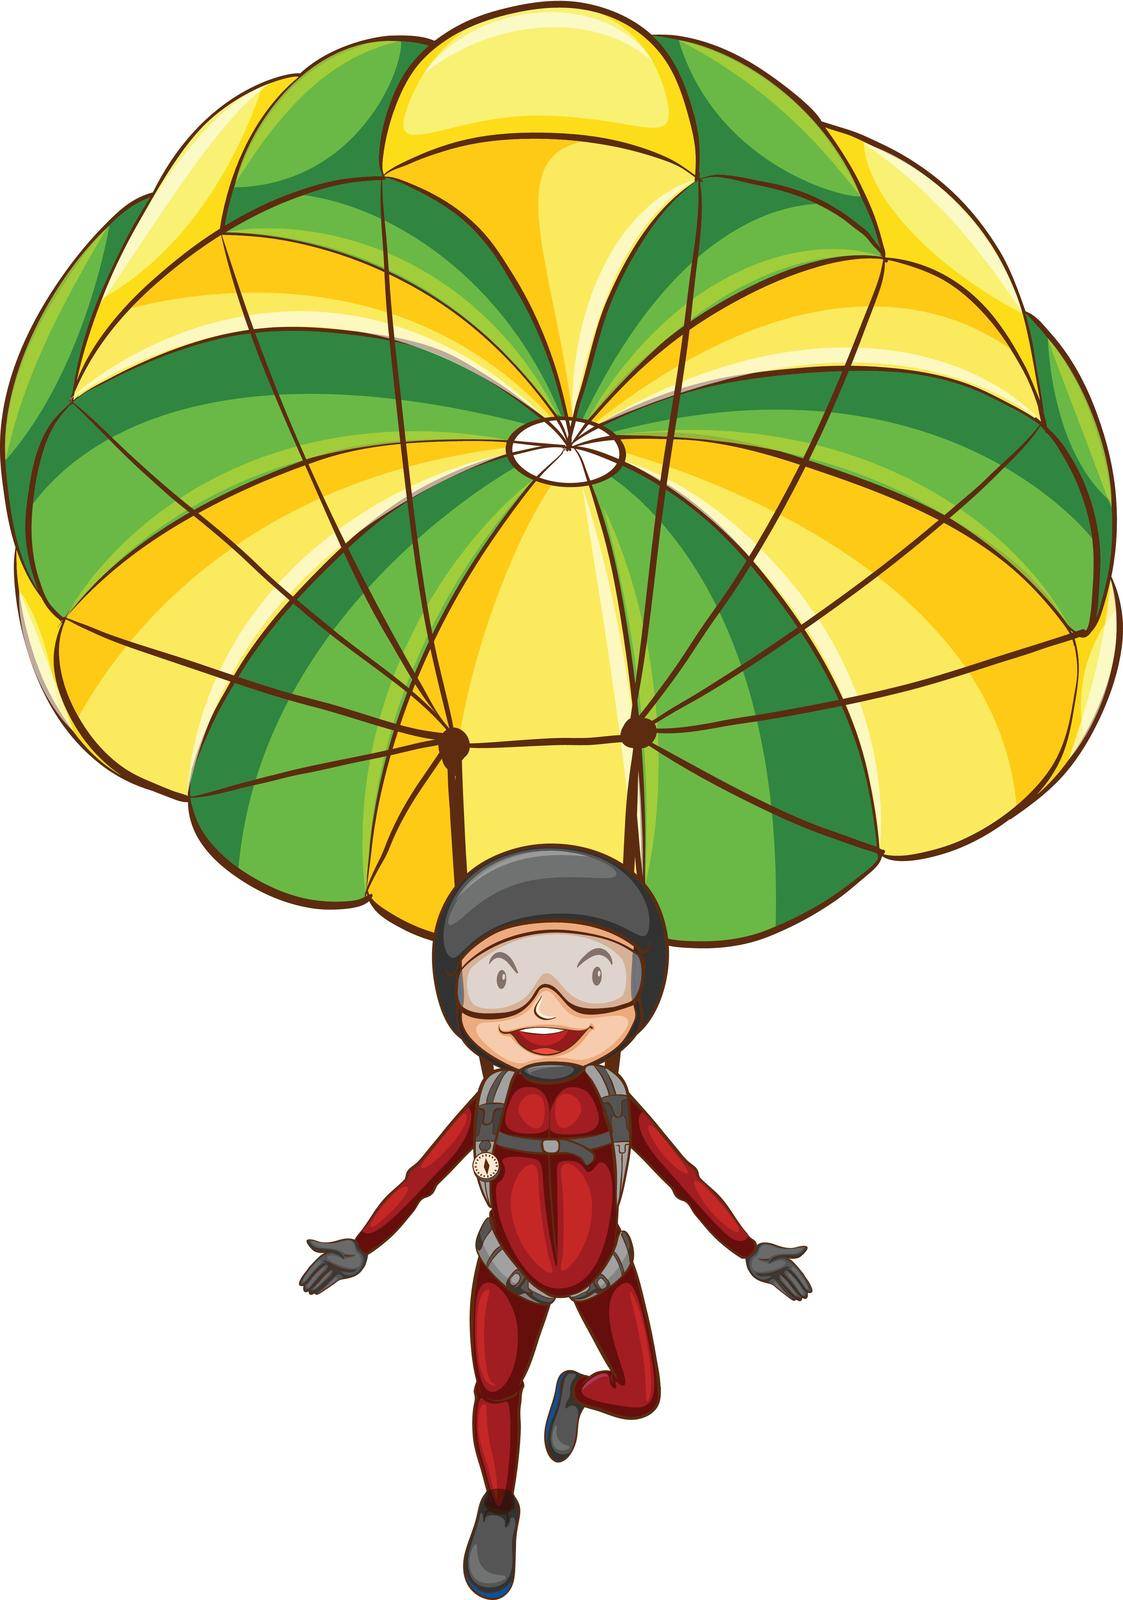 Illustration of a person parachuting in the sky